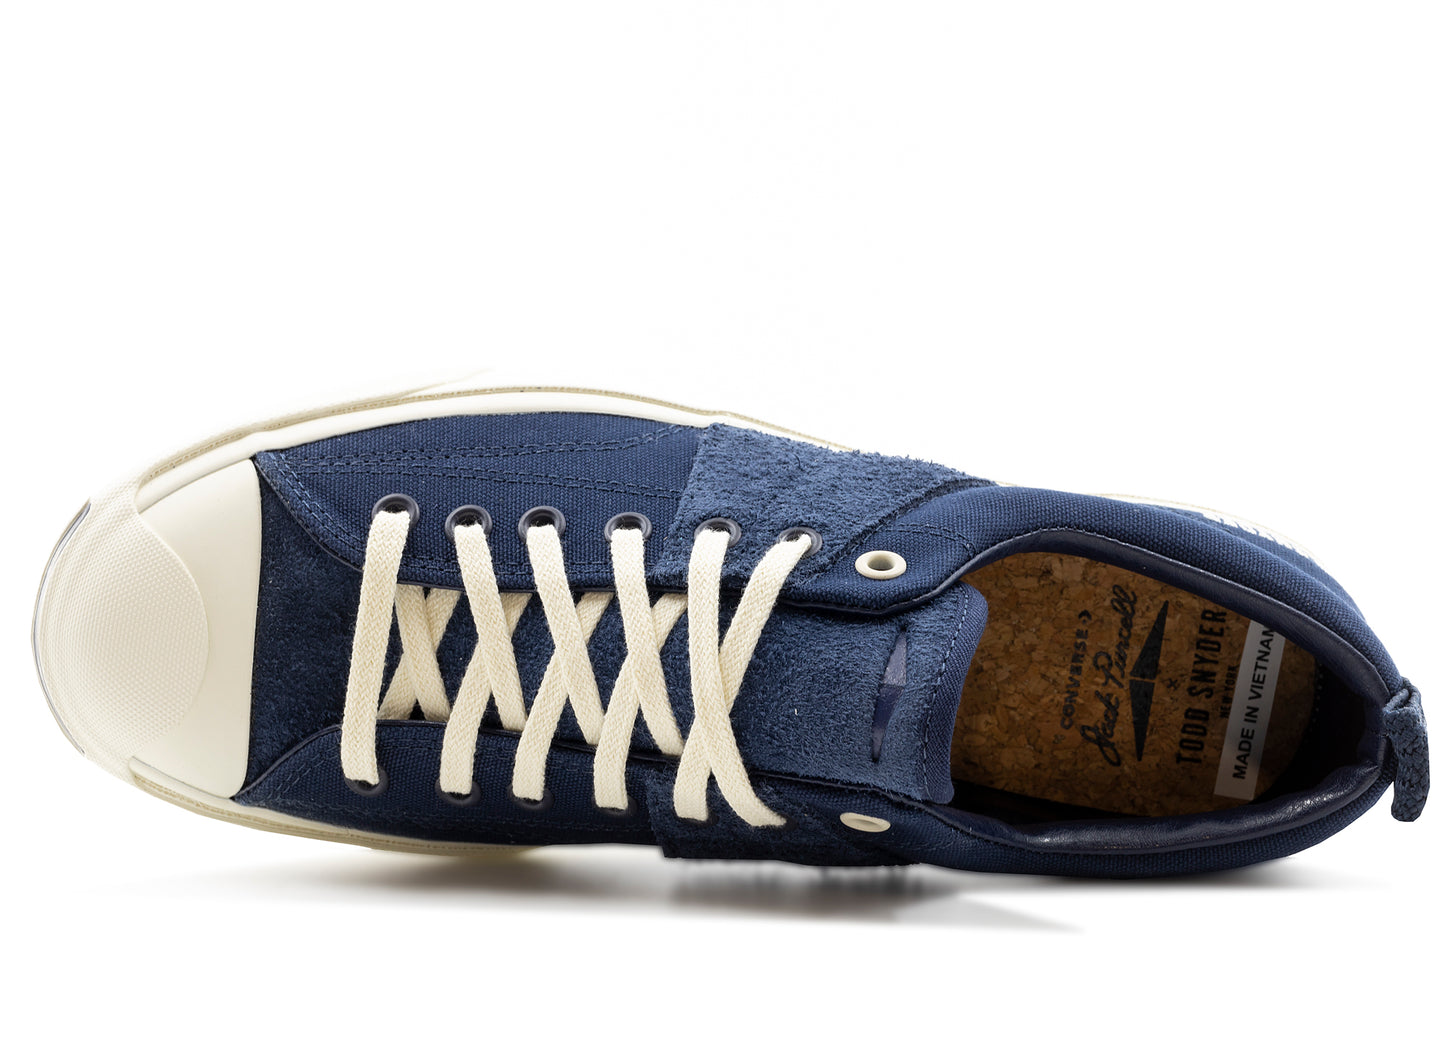 Converse x Todd SnyderJack Purcell Ox